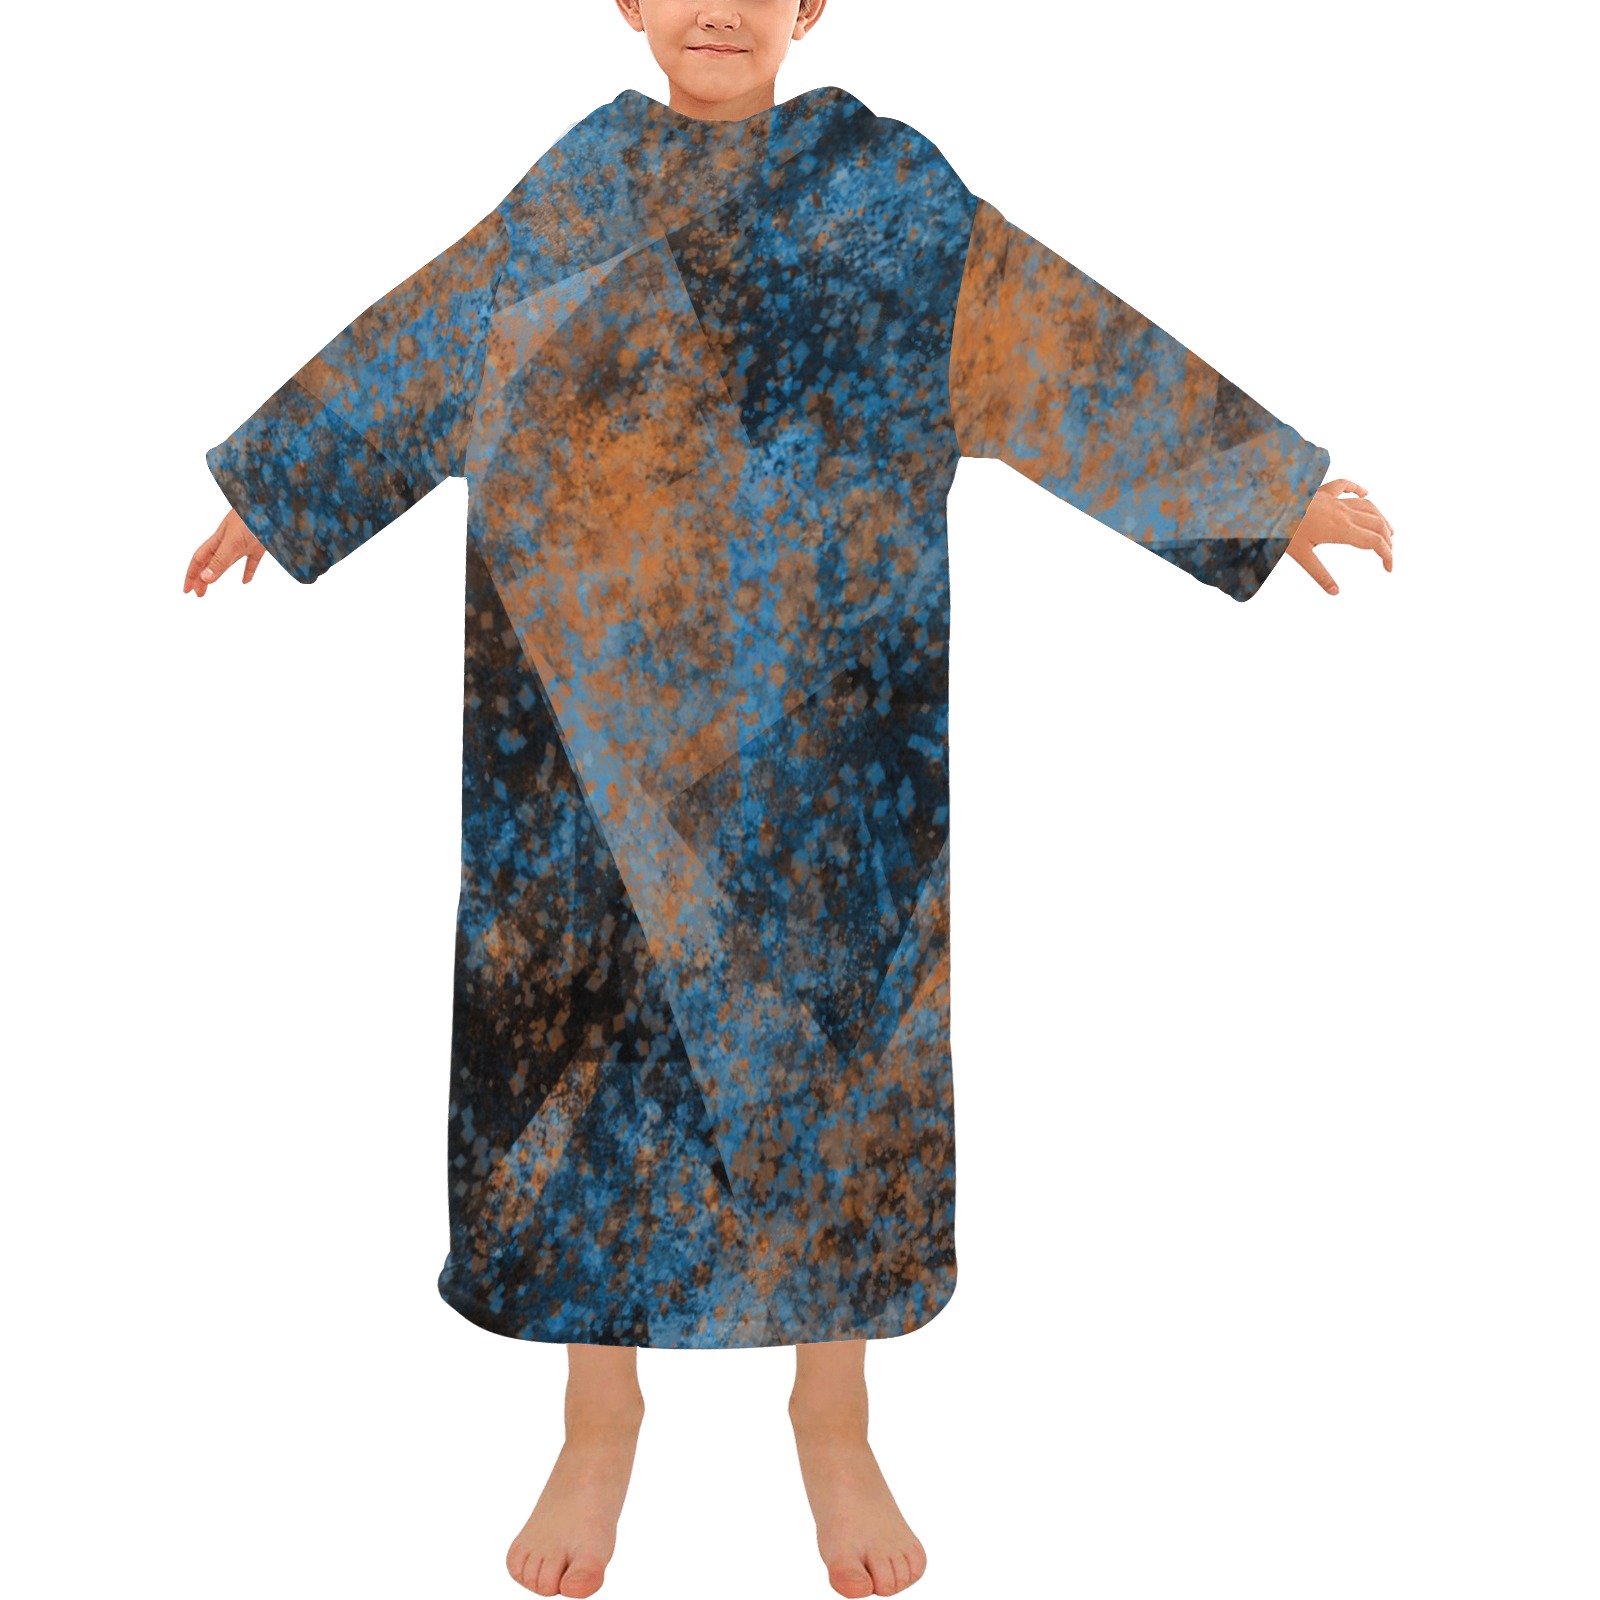 RusticTomorrow Blanket Robe with Sleeves for Kids